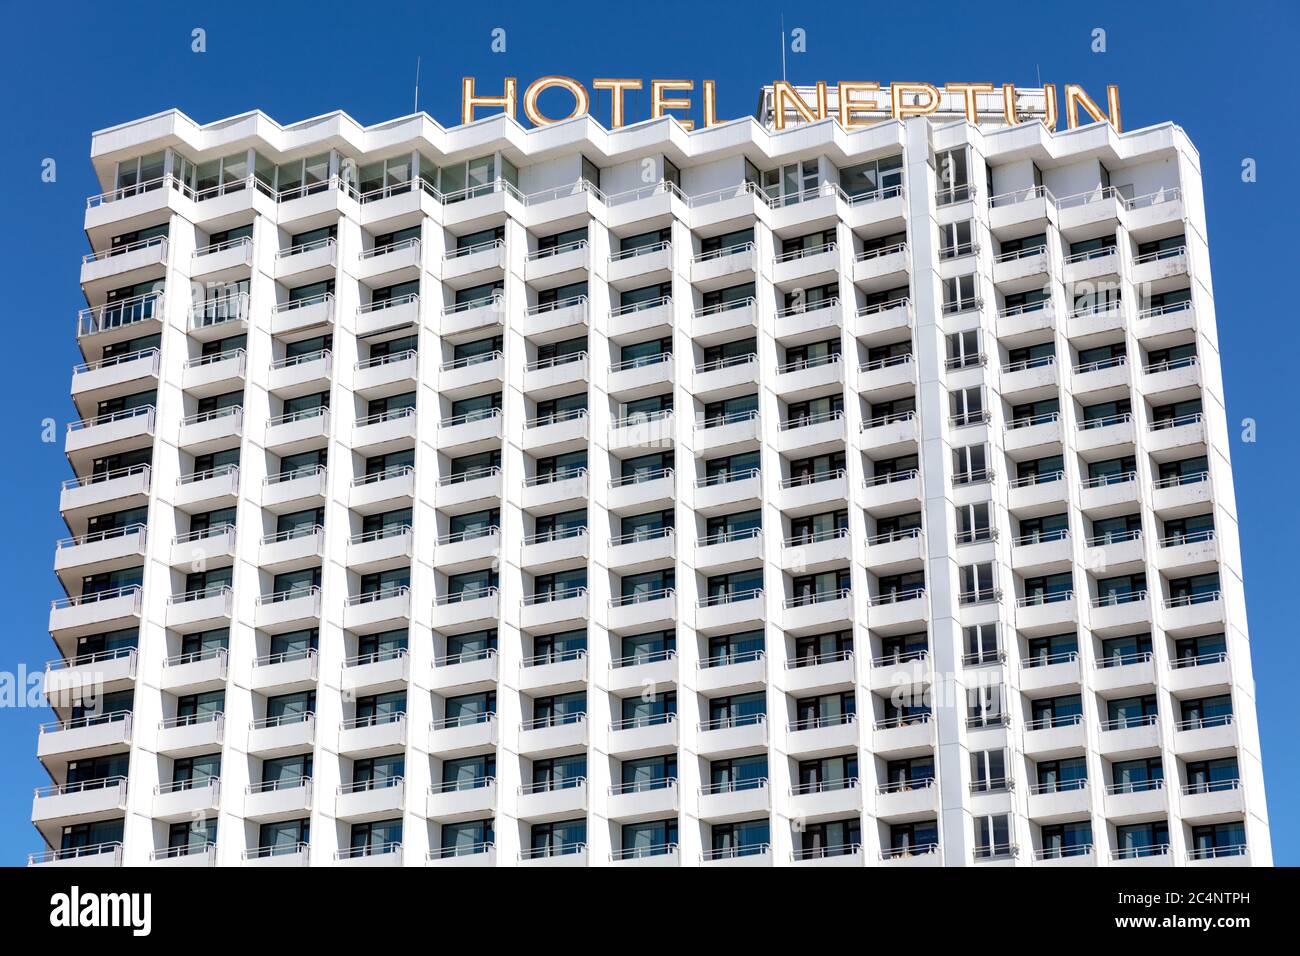 Hotel Neptun in Warnemünde, Germany. It is a 5-star hotel which opened in 1971, located directly on the beach of the Baltic Sea. Stock Photo